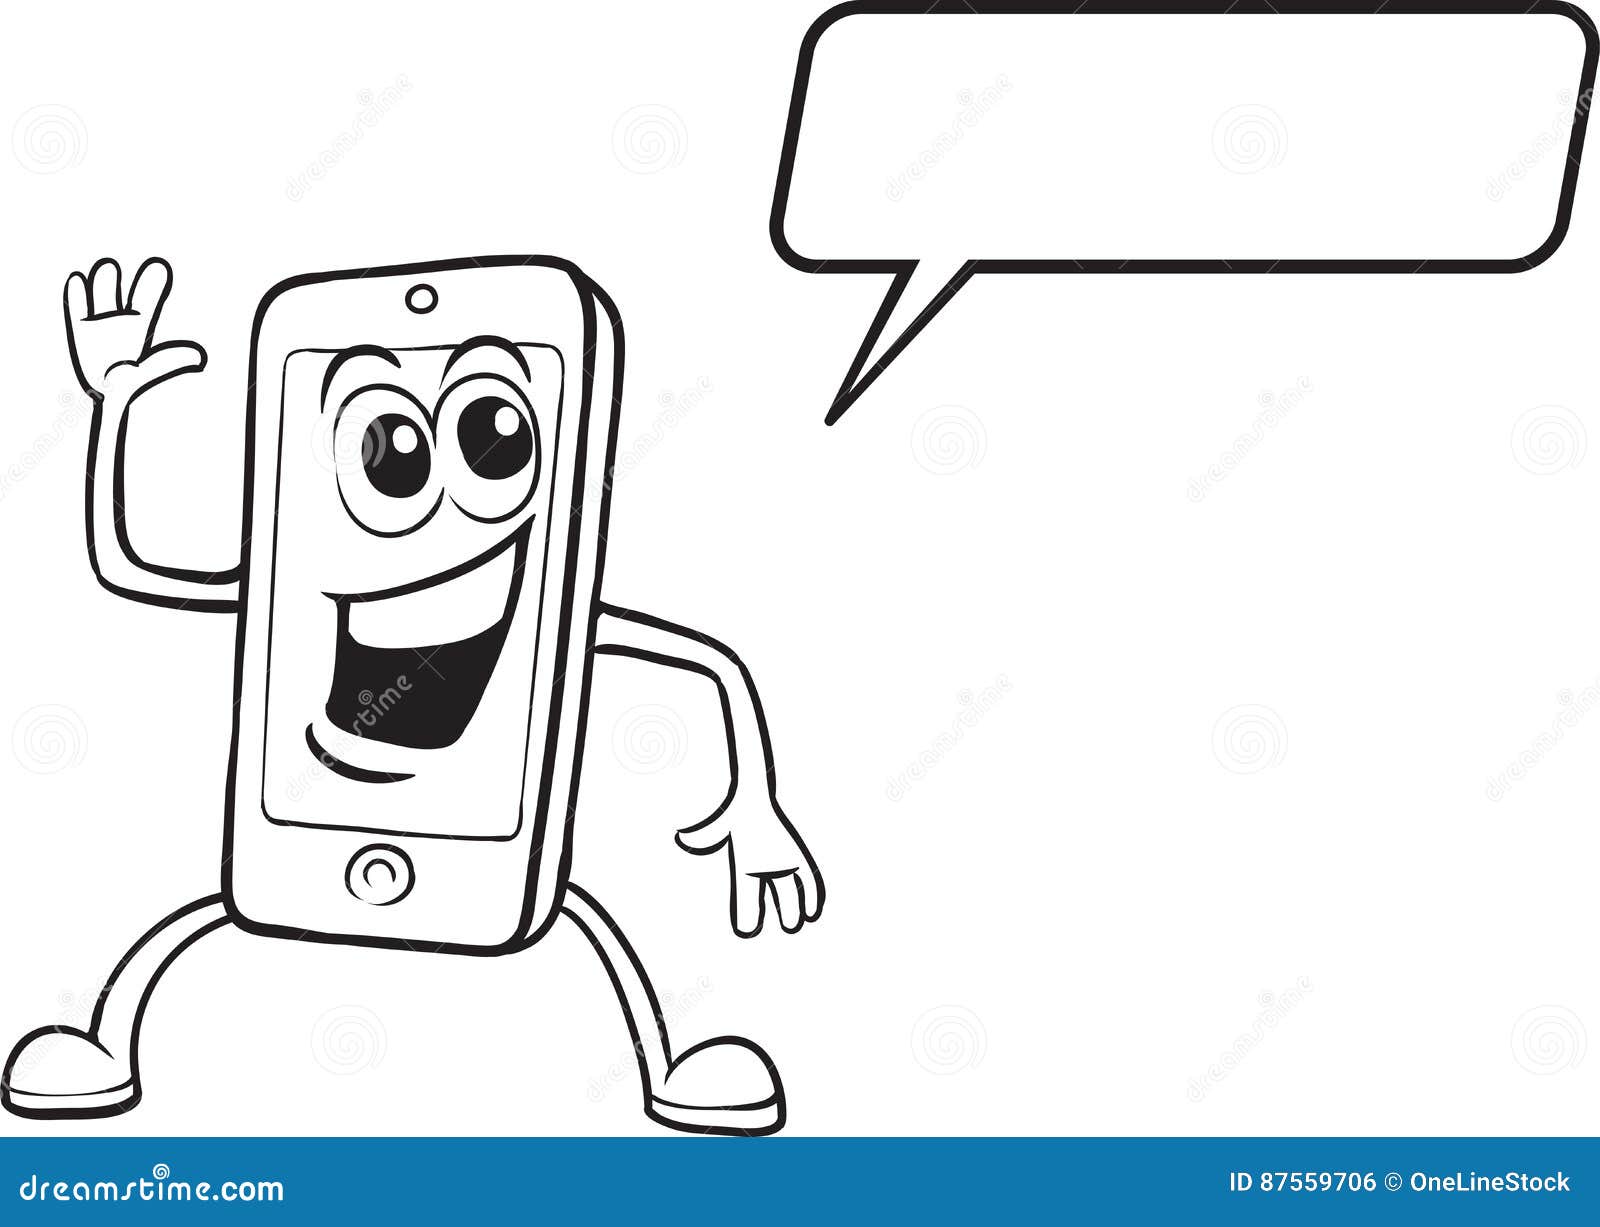 Coloring Book Cartoon Smiling Cell Phone Character Stock Vector Illustration Of Technology Expression 87559706